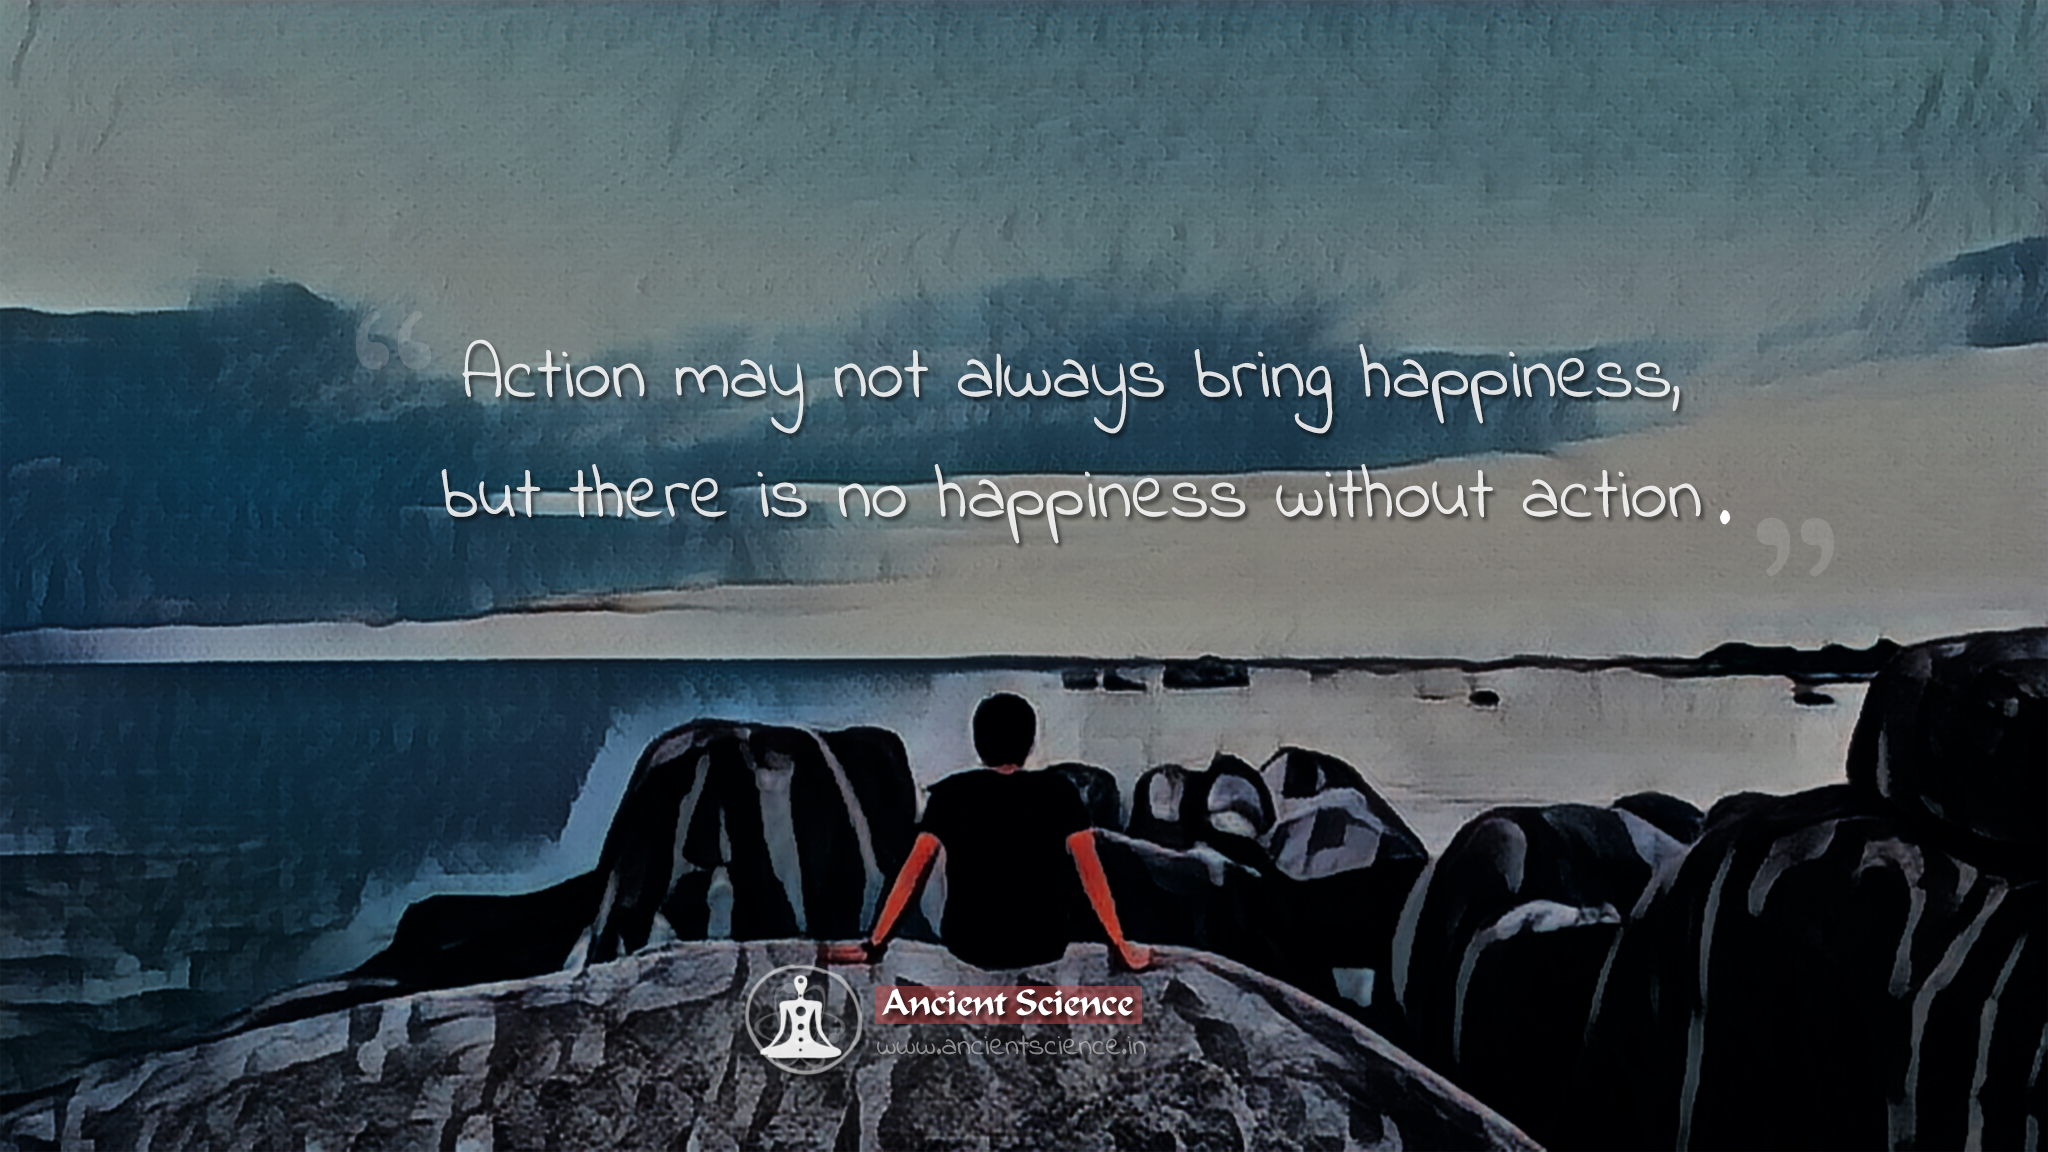 Action may not always bring happiness, but there is no happiness without action.